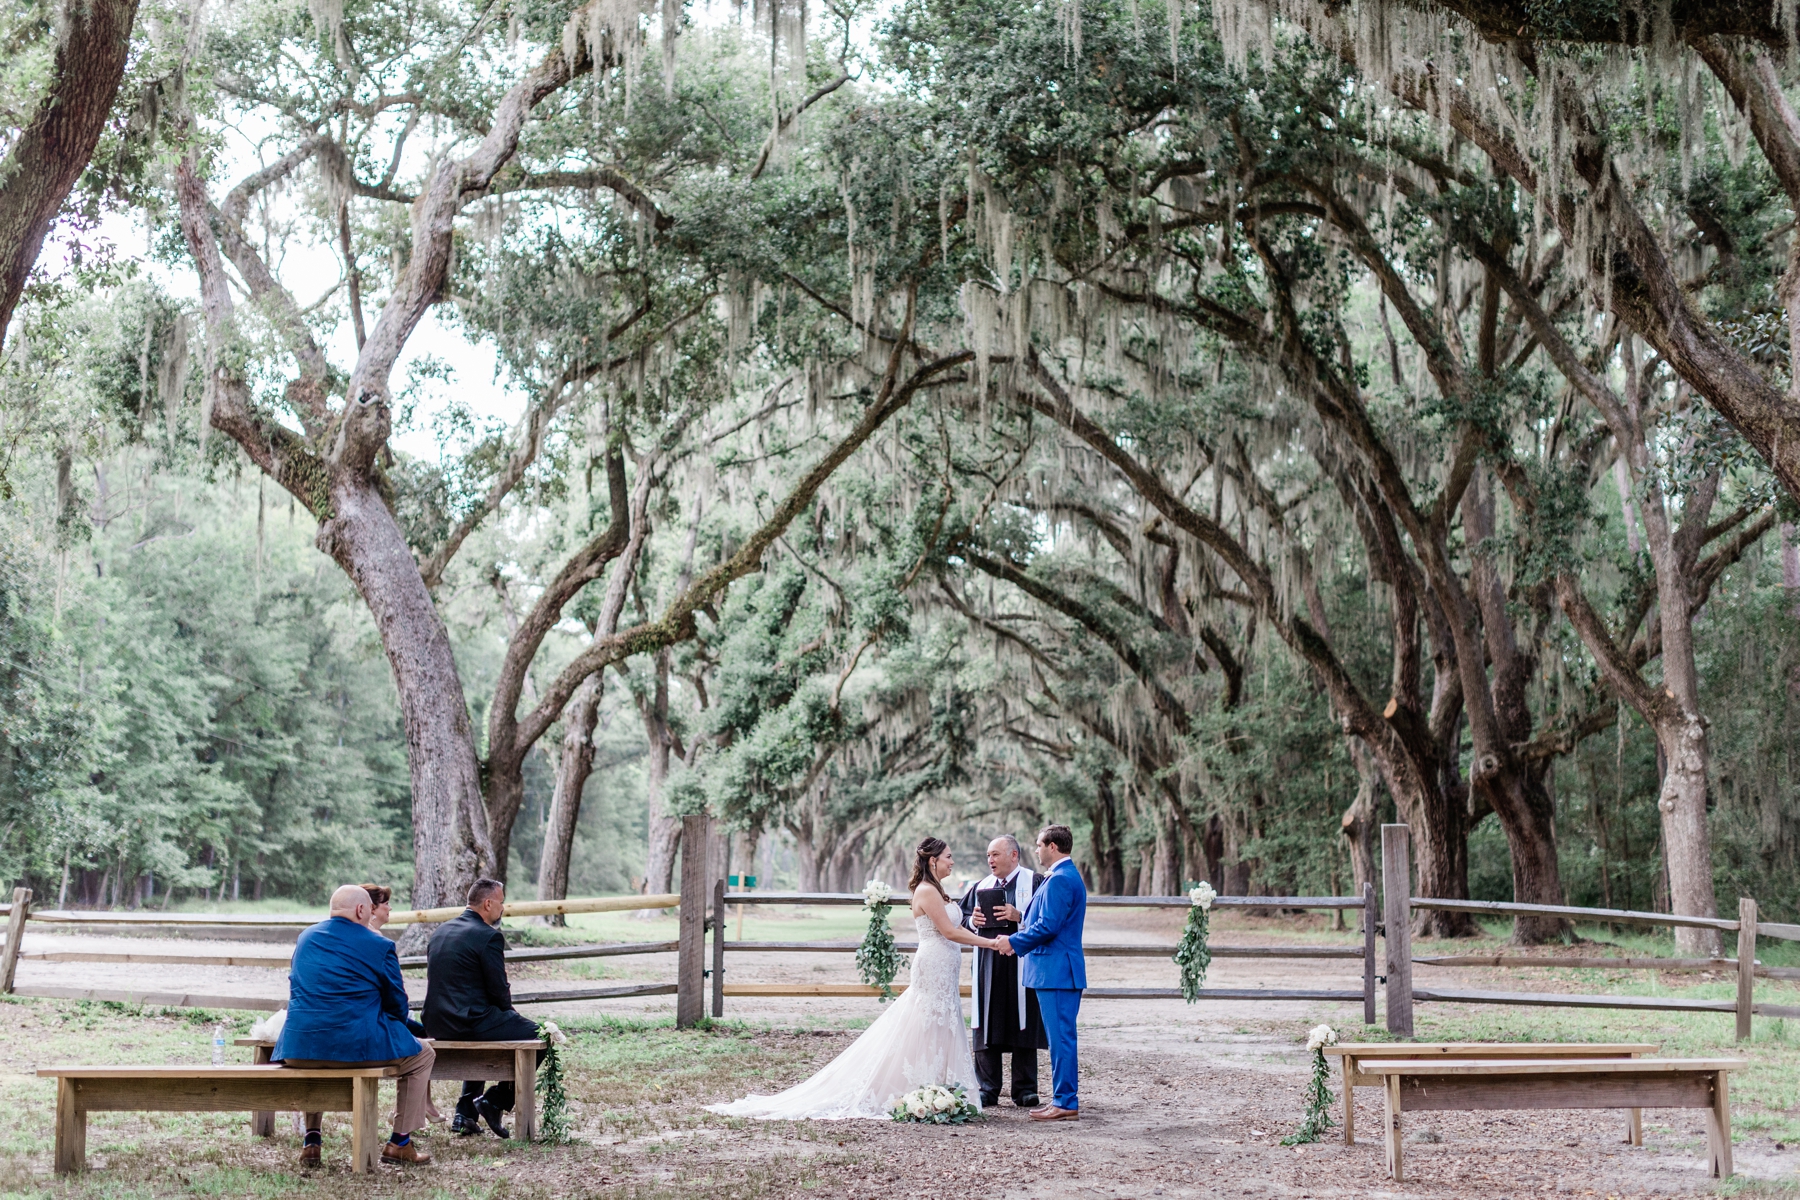 Elopement ceremony at Wormsloe Historic Site in Savannah